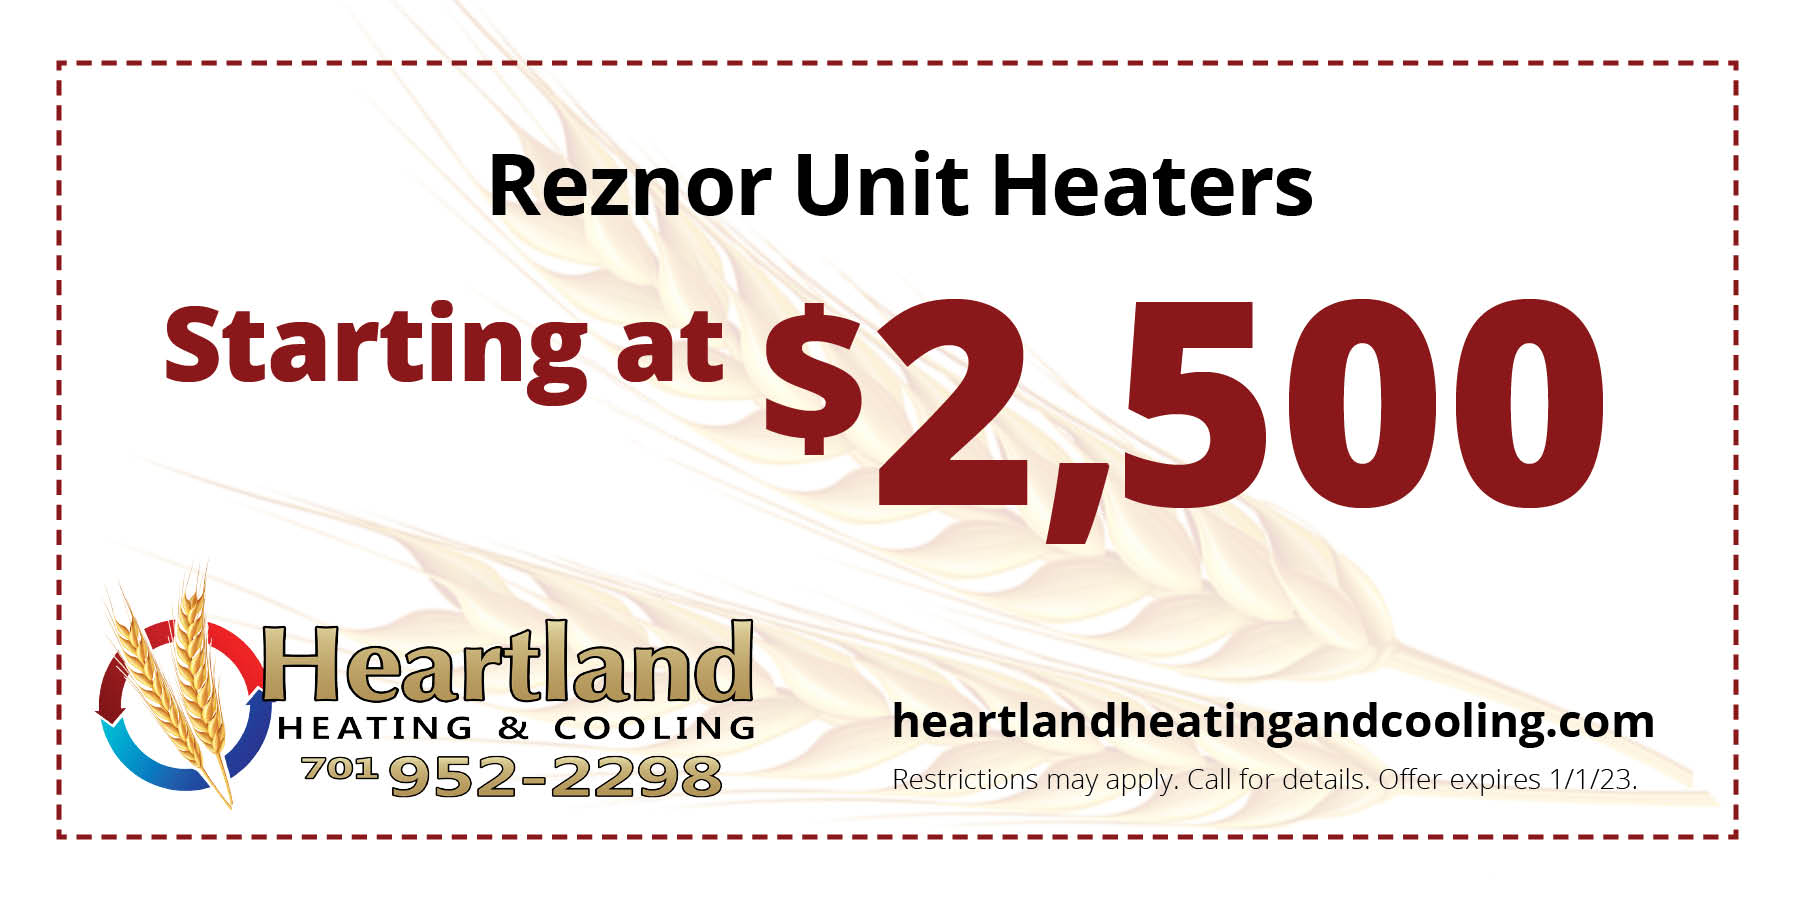 Reznor unit heaters starting at